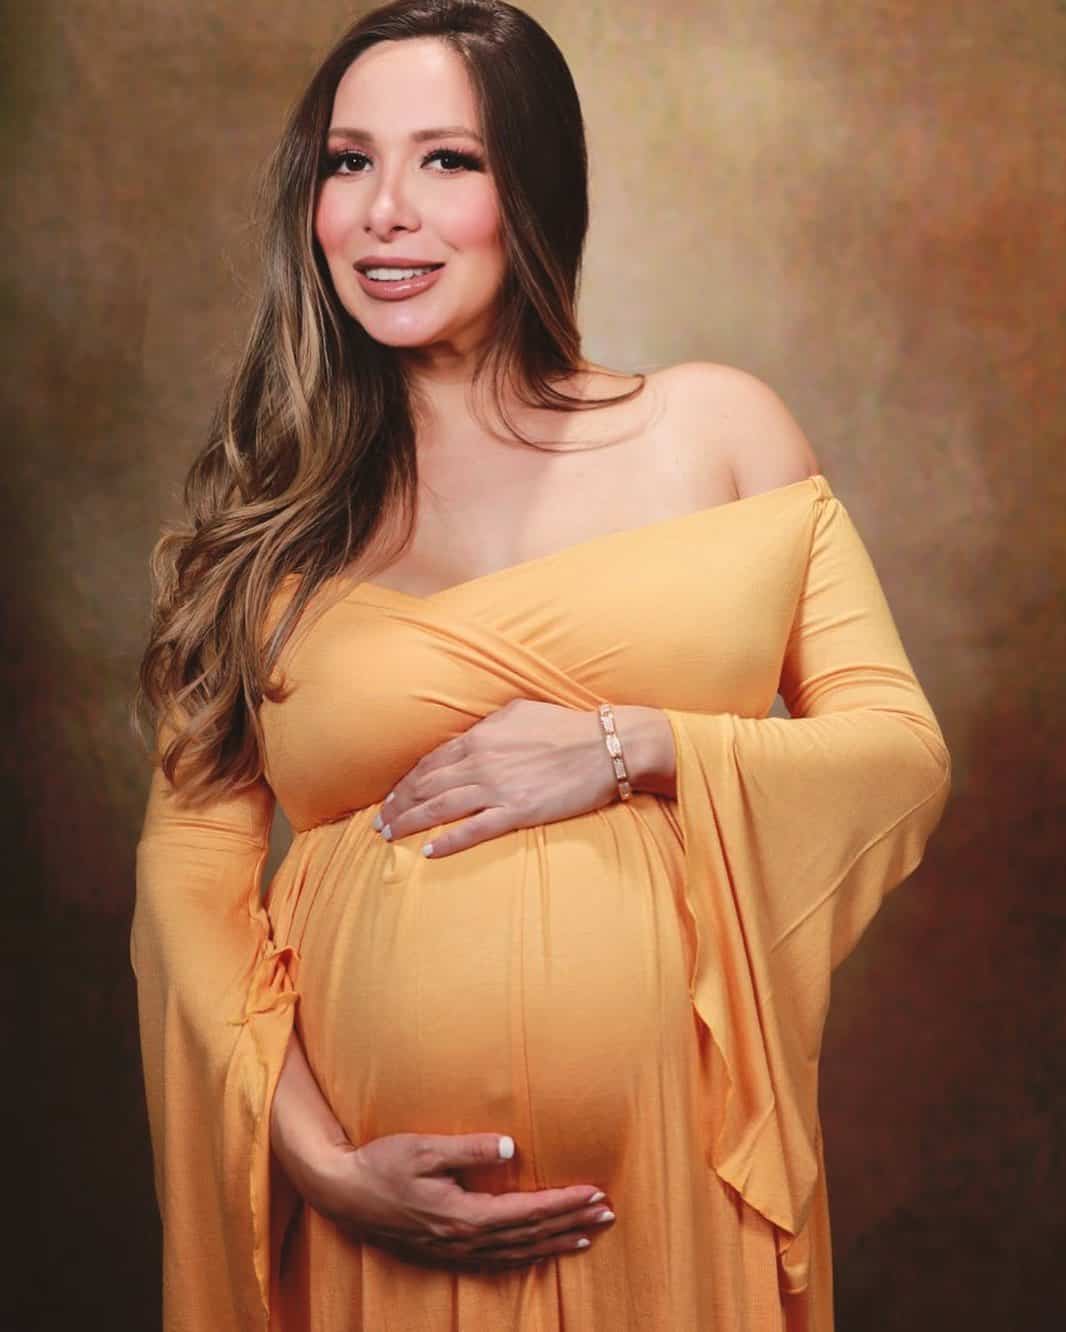 Frida Chavez Pregnant With Her Baby Boy